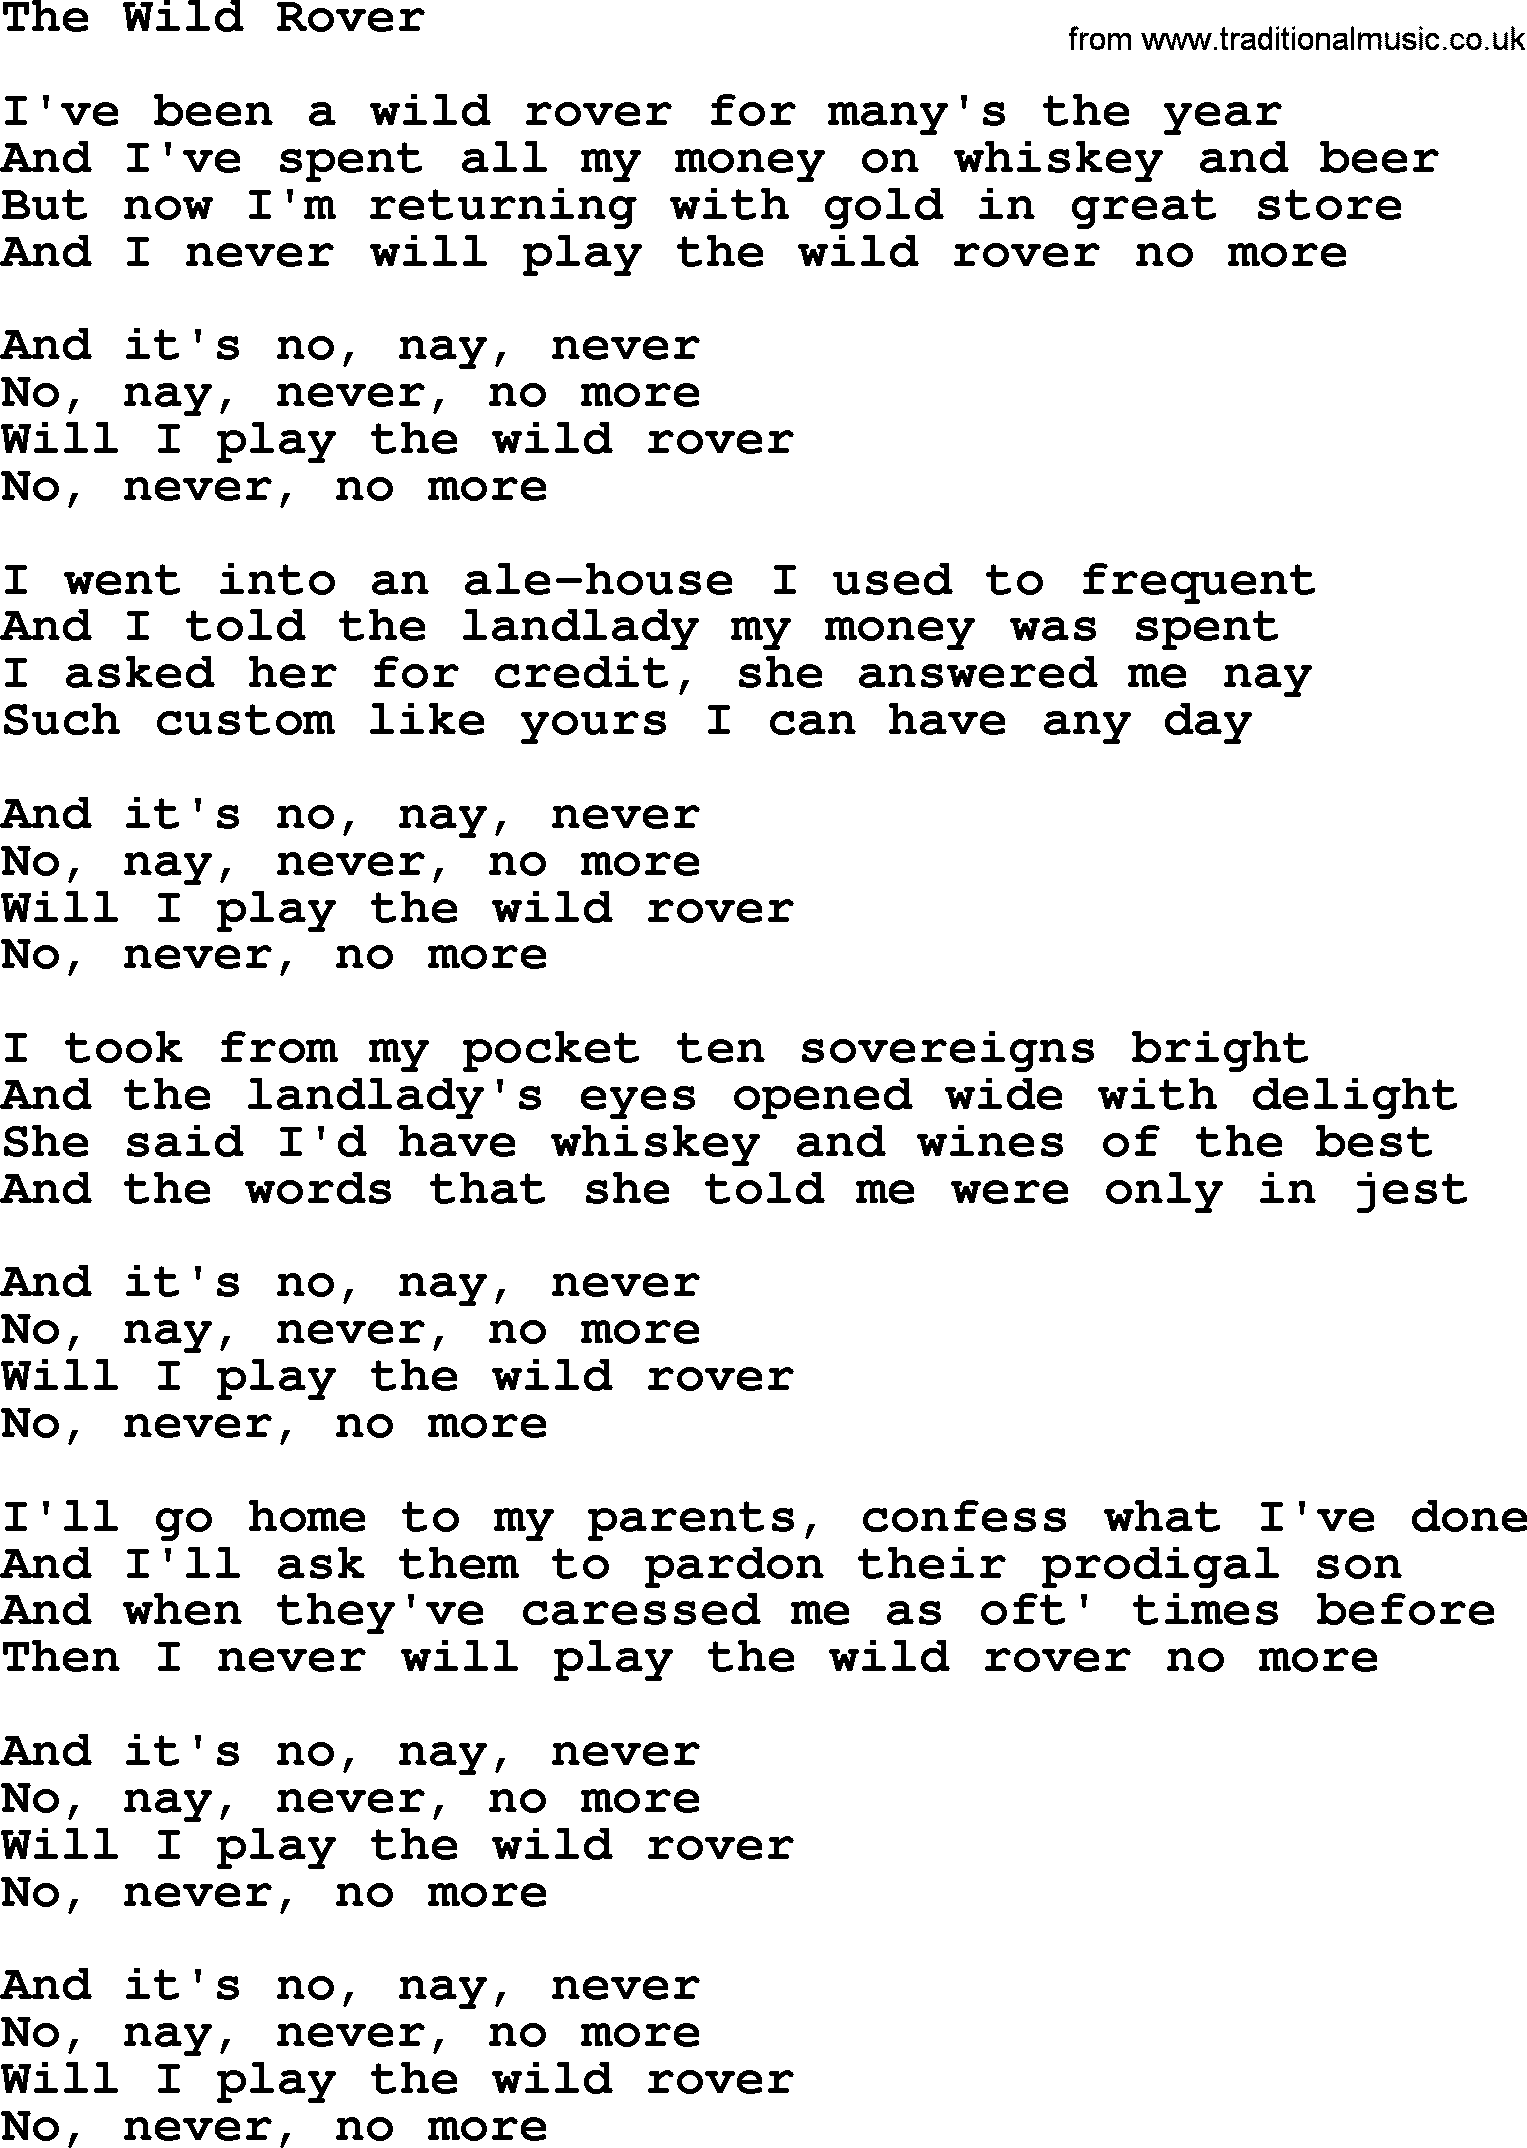 The Dubliners song: The Wild Rover, lyrics